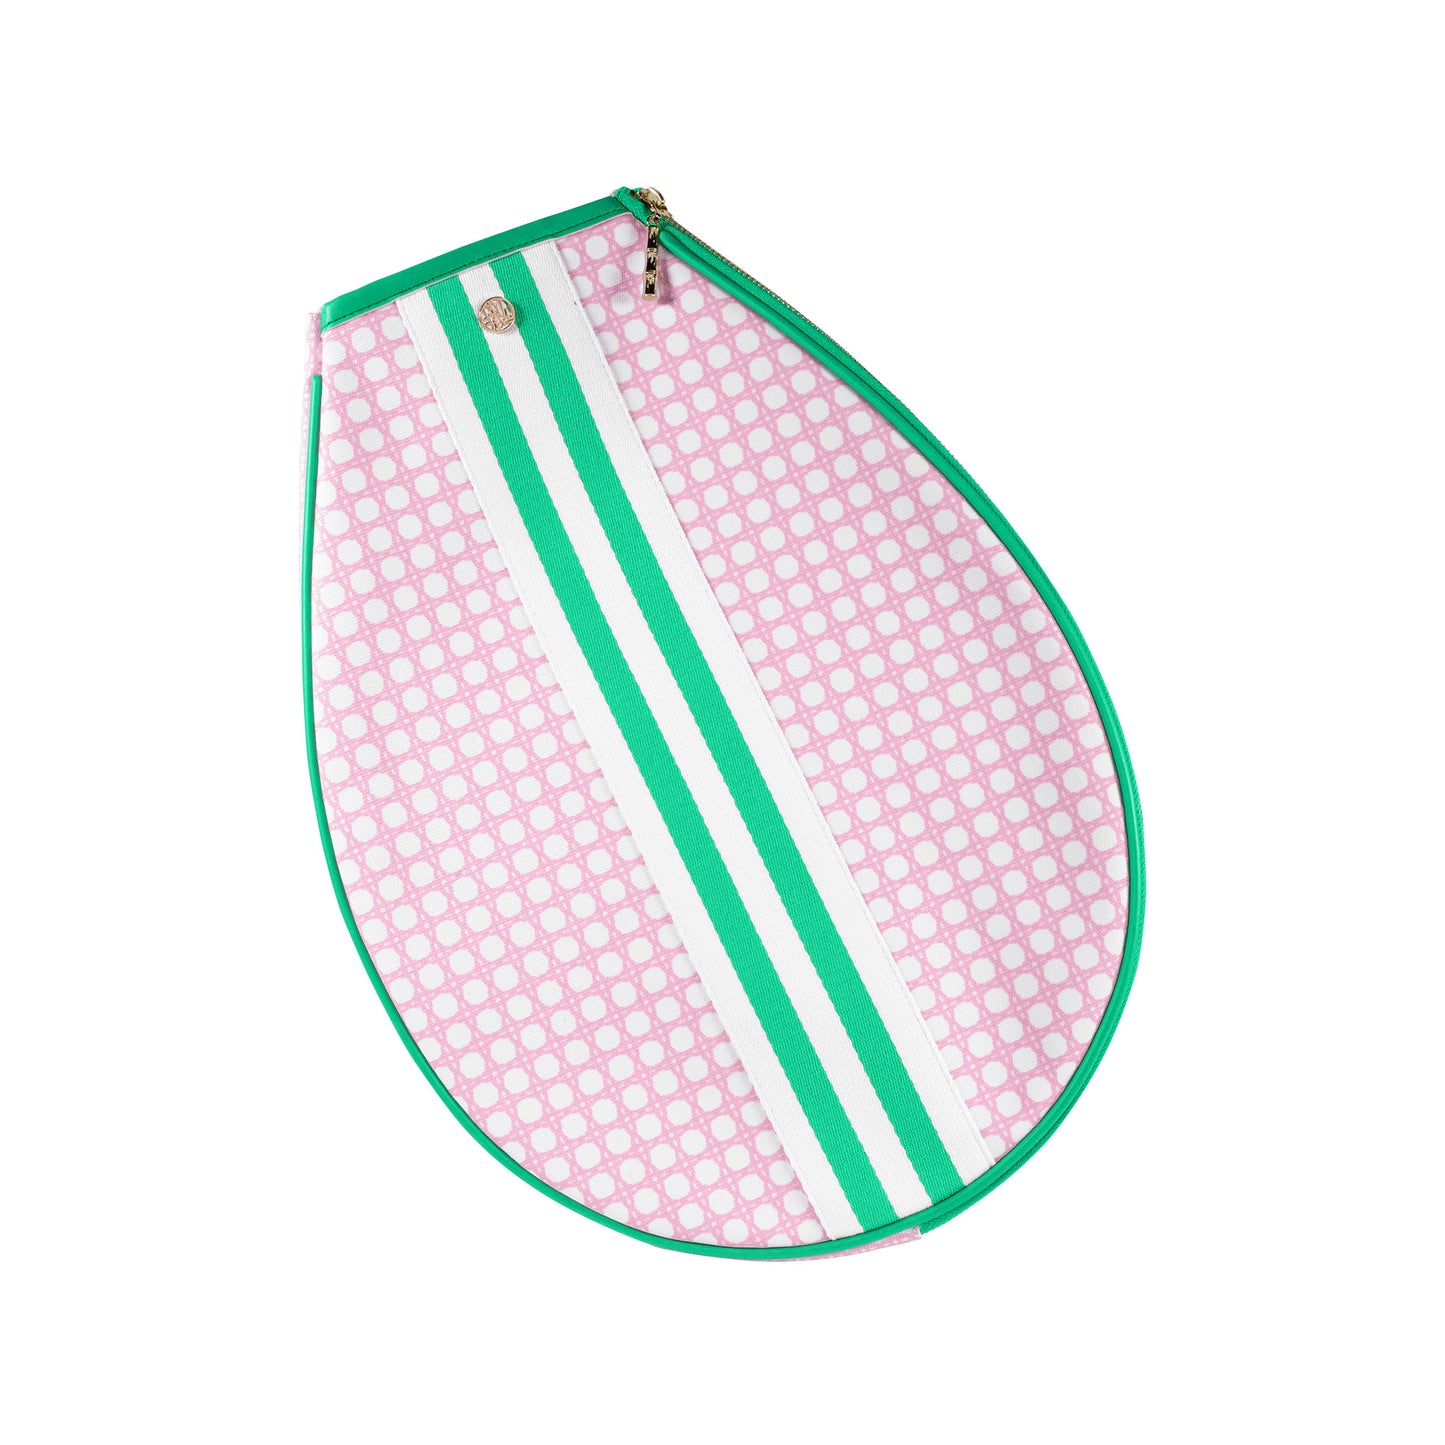 Tennis Tote, Caning